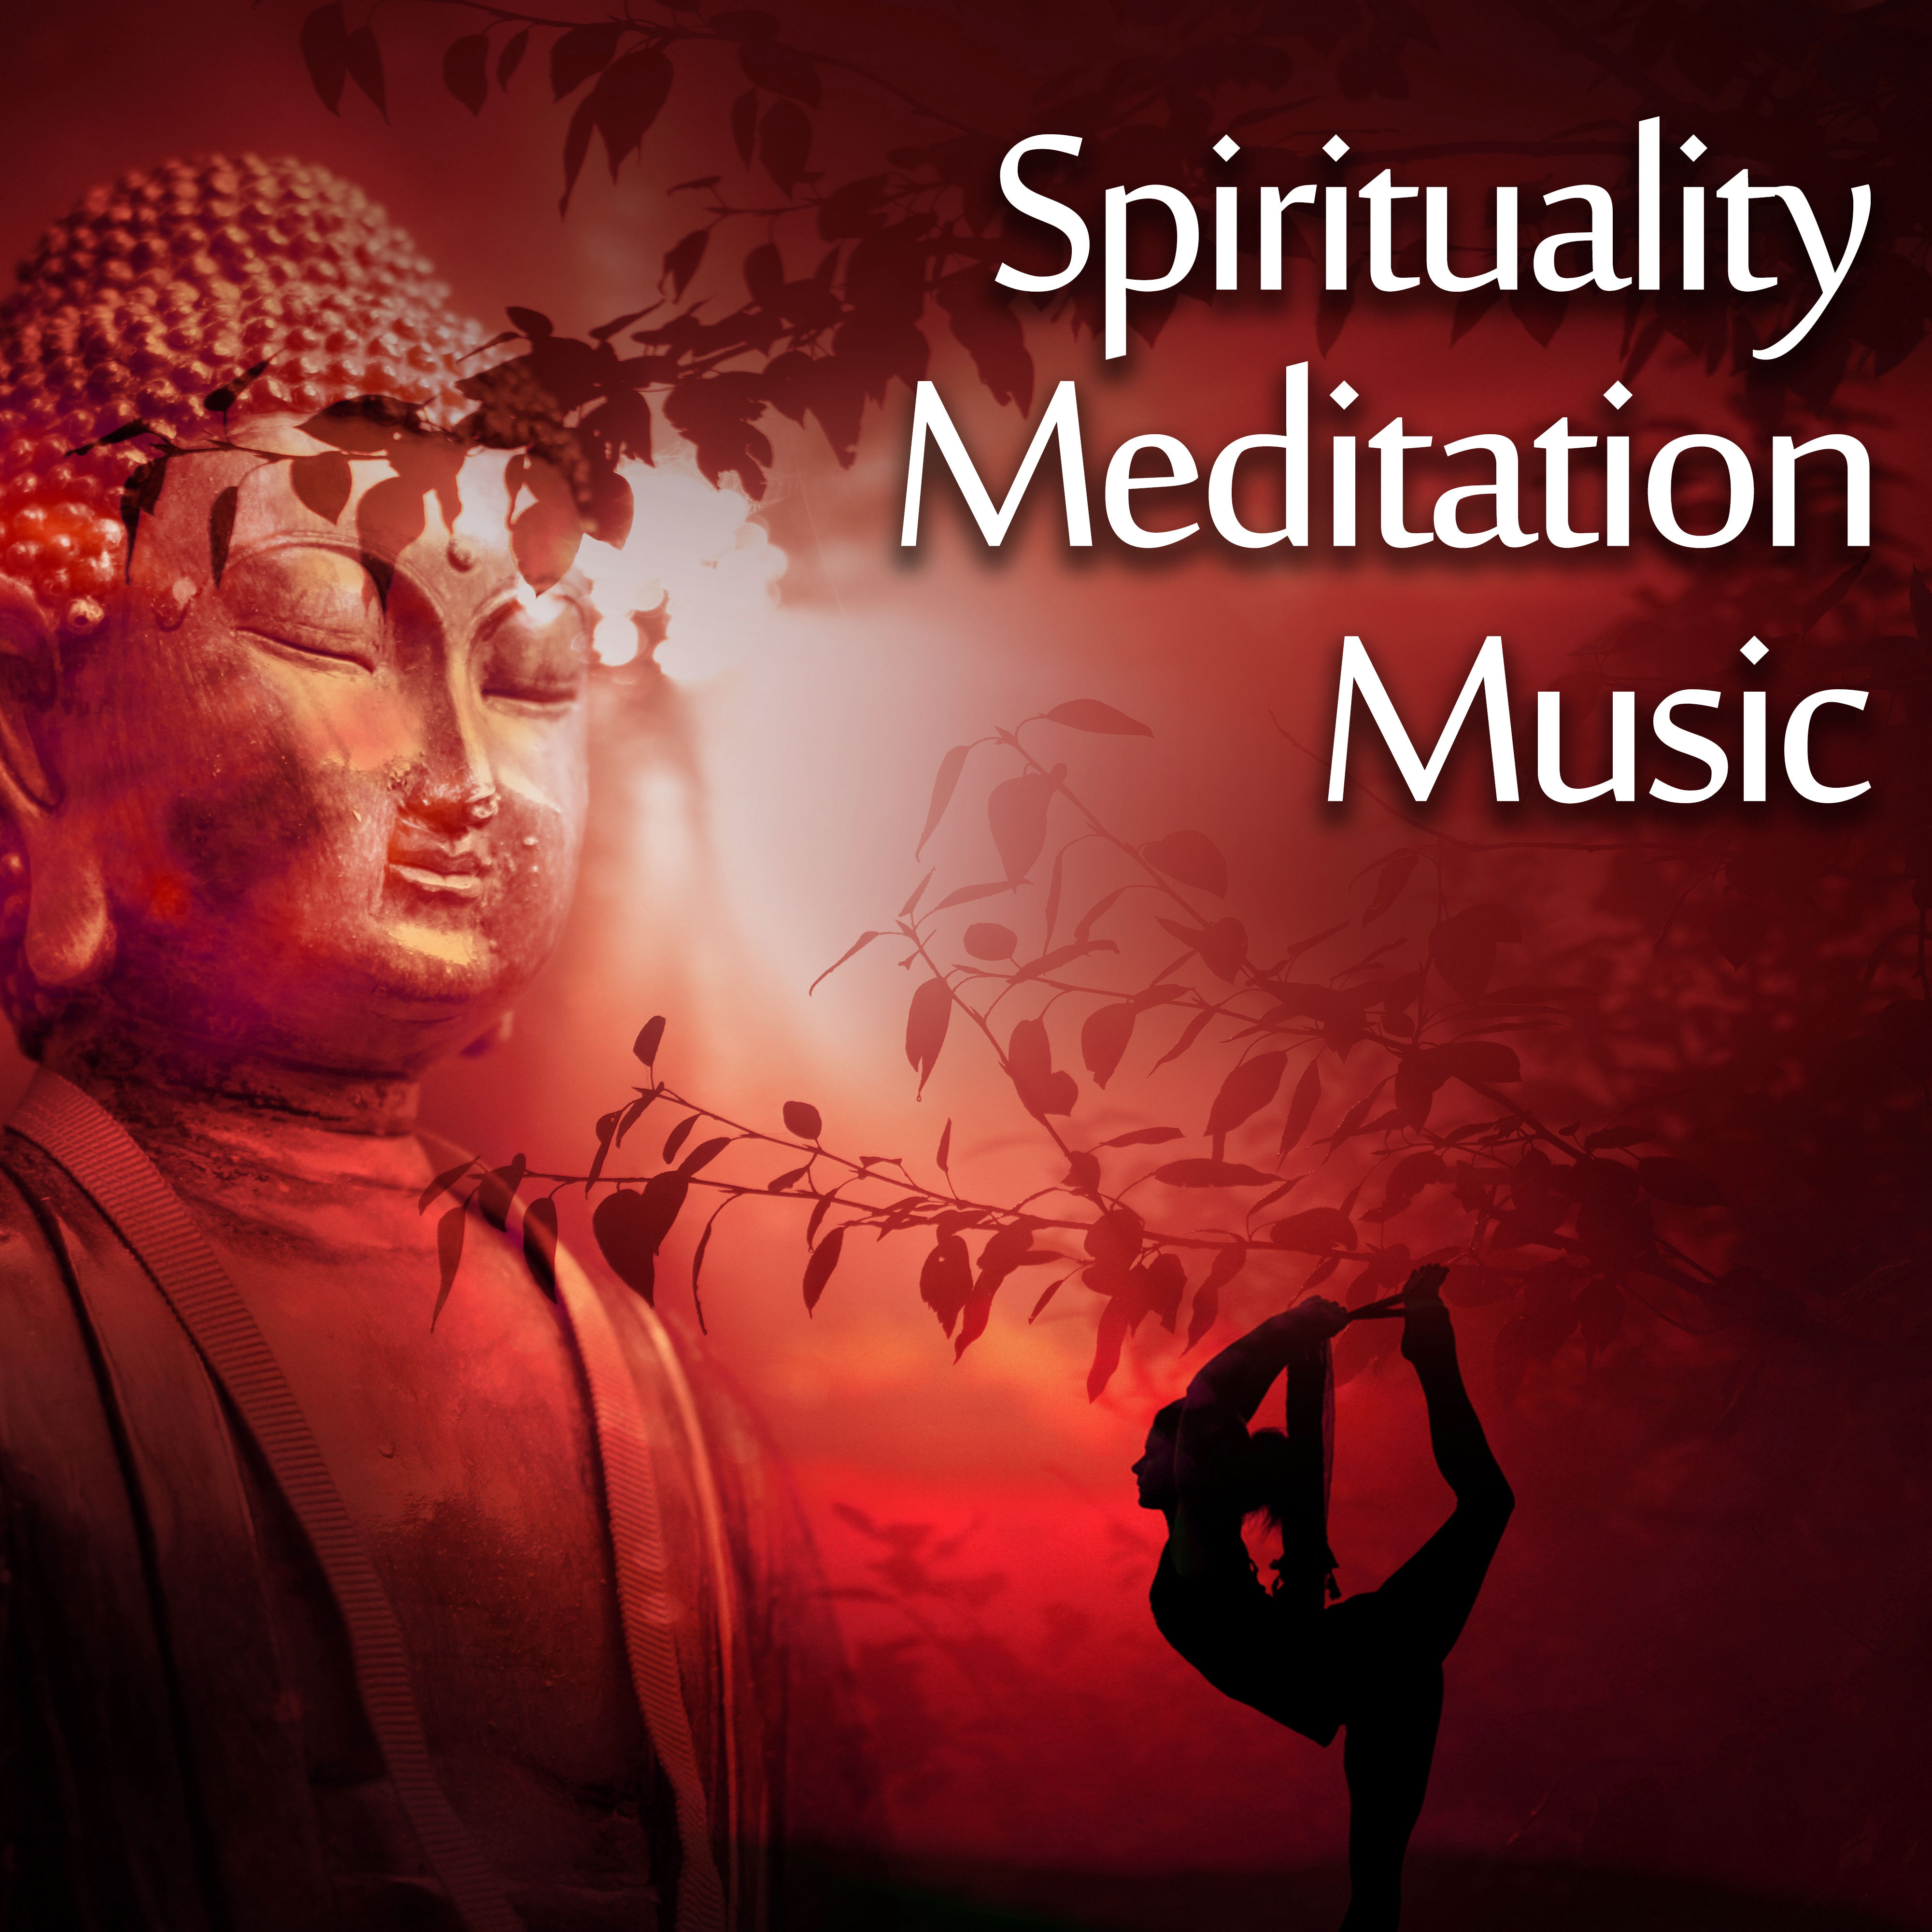 Spirituality Meditation Music – New Age for Meditation, Background Music for Yoga, Helpful for Mindfulness Training, Relax Your Mind